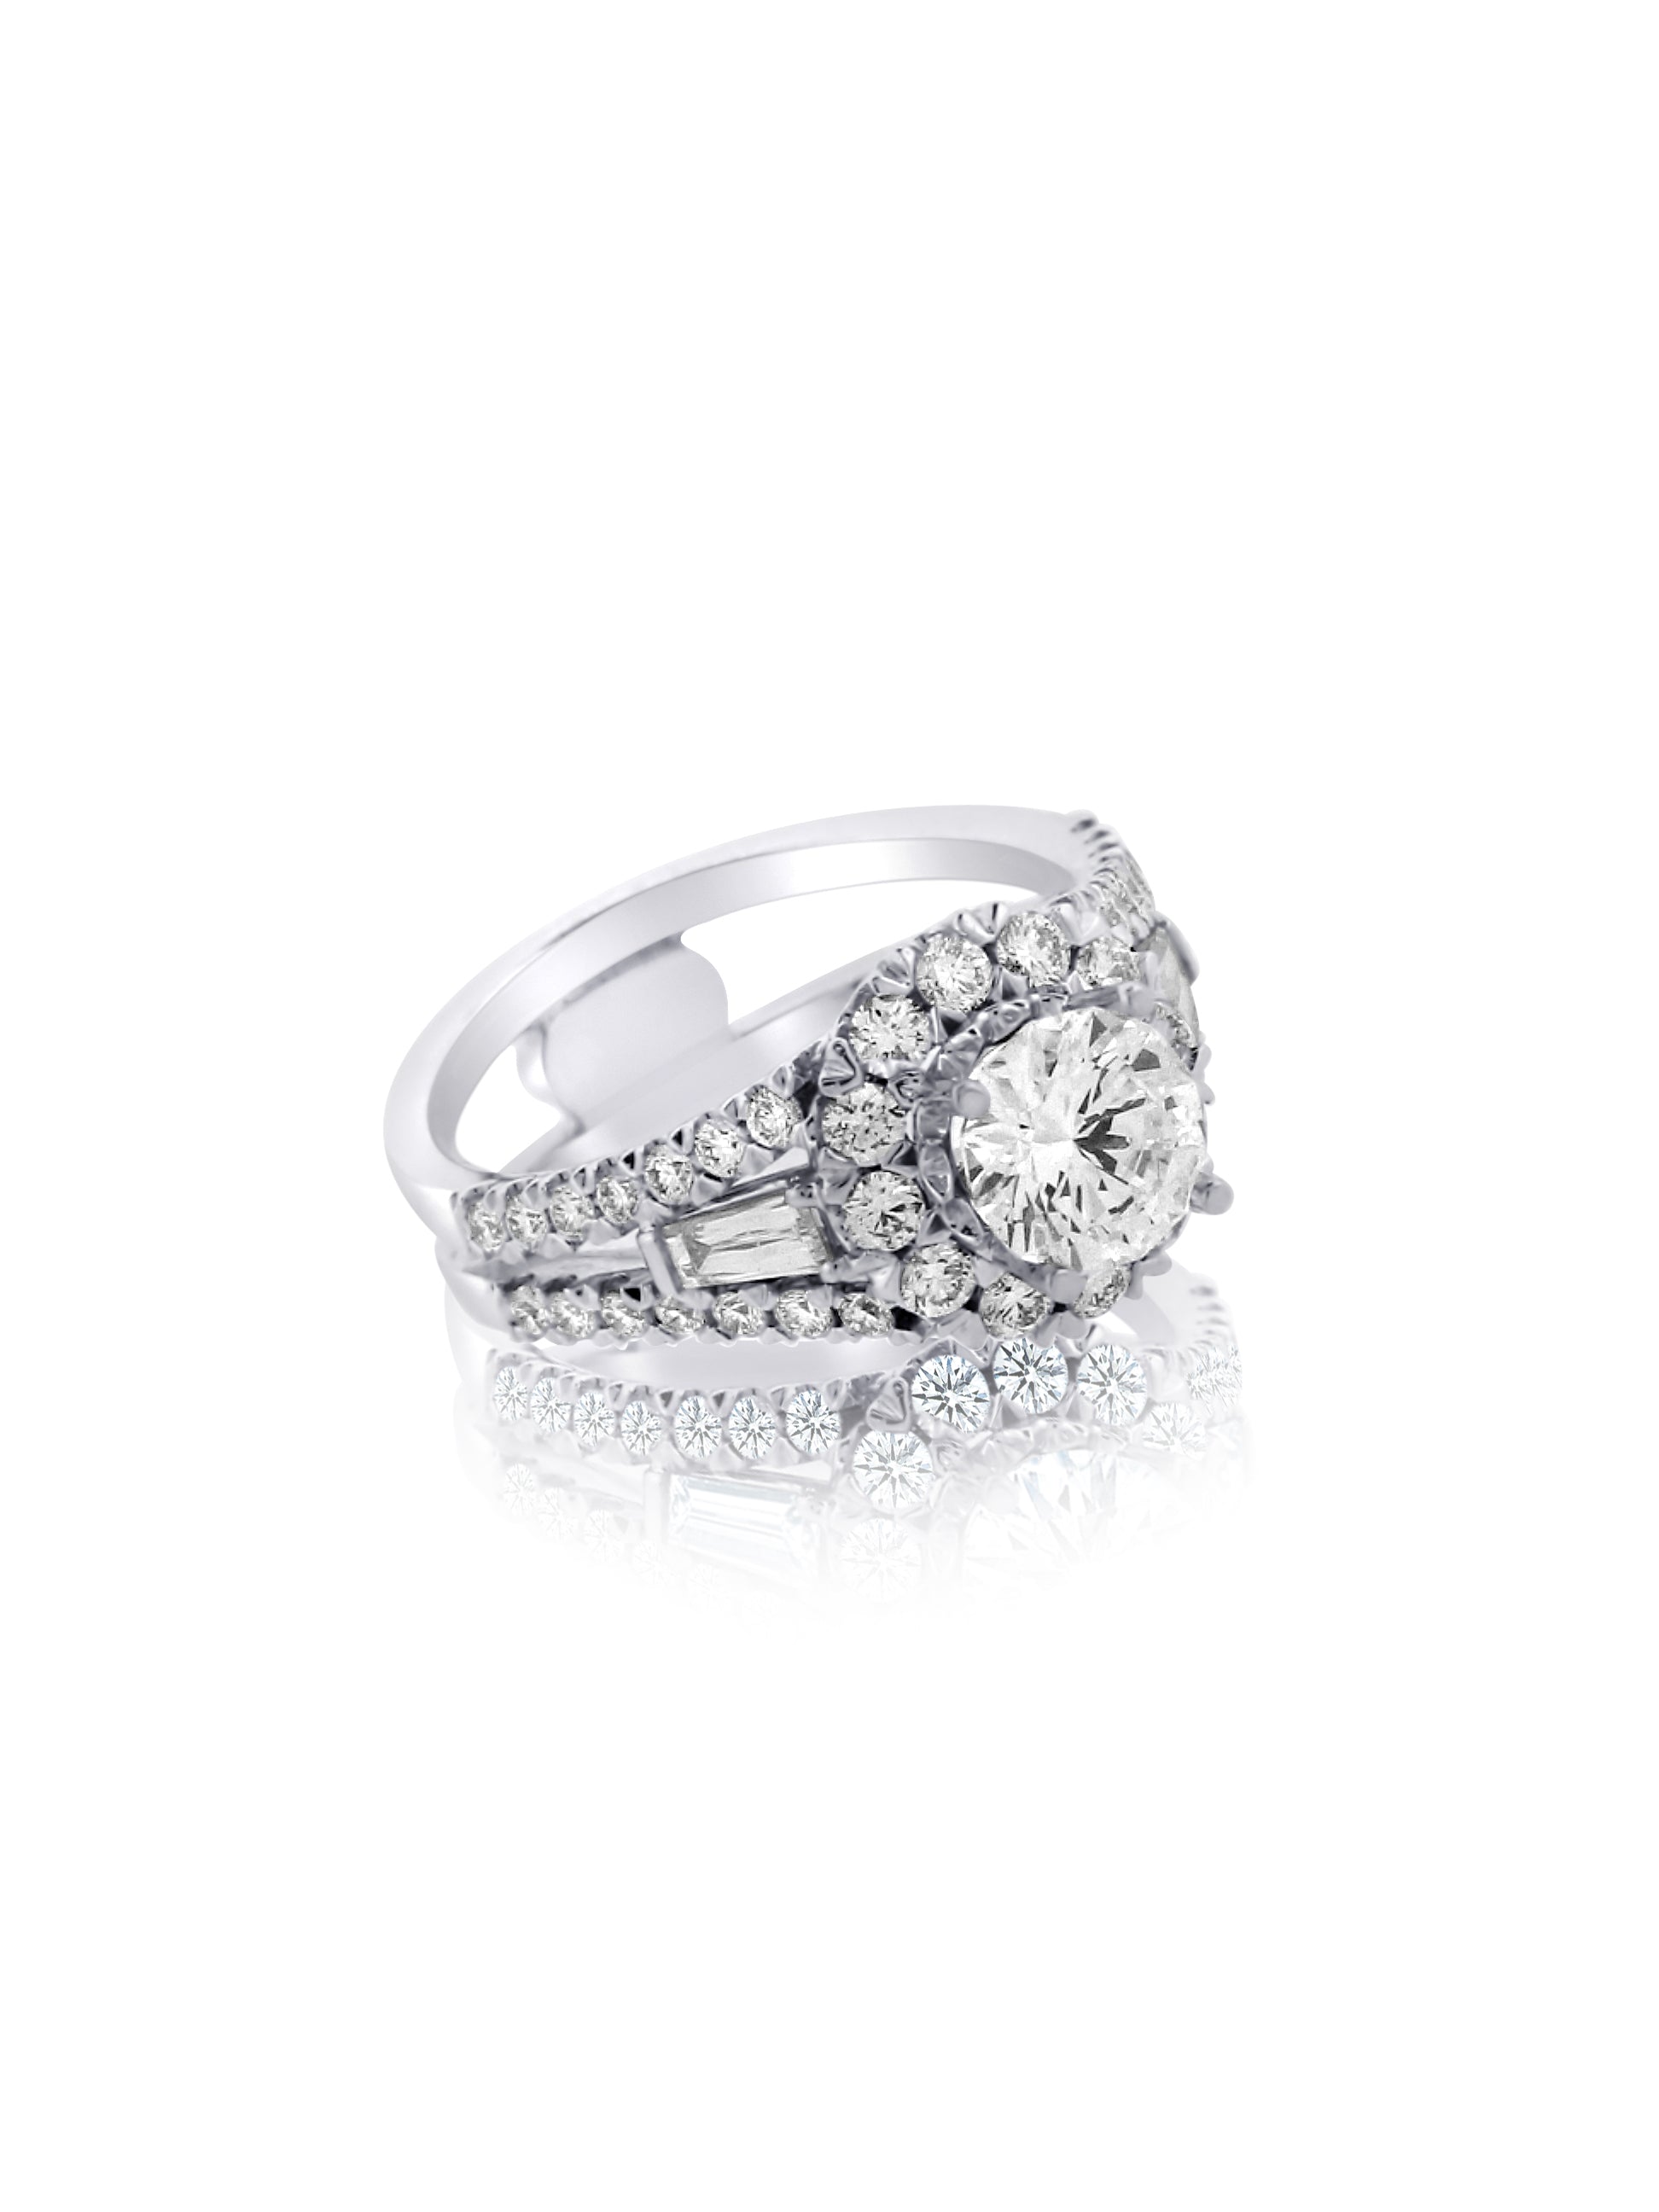 CHRISTOPHER DESIGNS 18K WHITE GOLD 1.19CT DIAMOND ENGAGEMENT RING MOUNTING (CENTER STONE SOLD SEPARATELY)